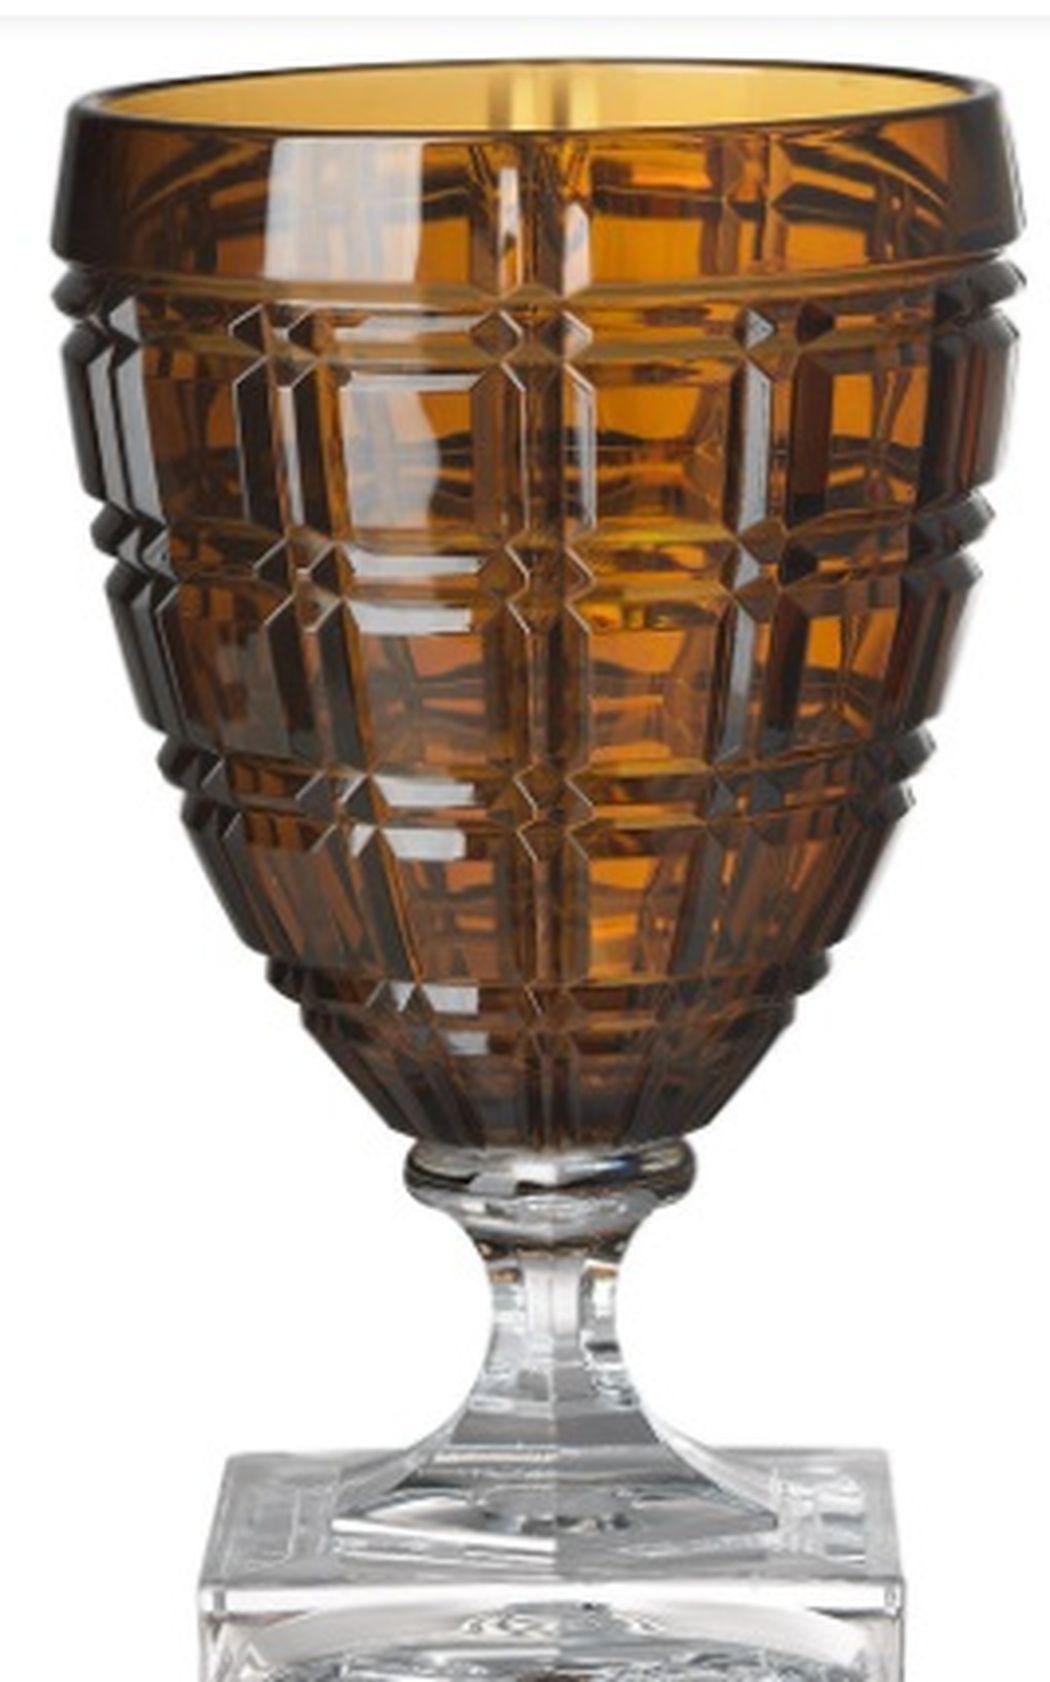 Set of 6 wine glasses Winston model from the Mario Luca Giusti collection Color: AMBER